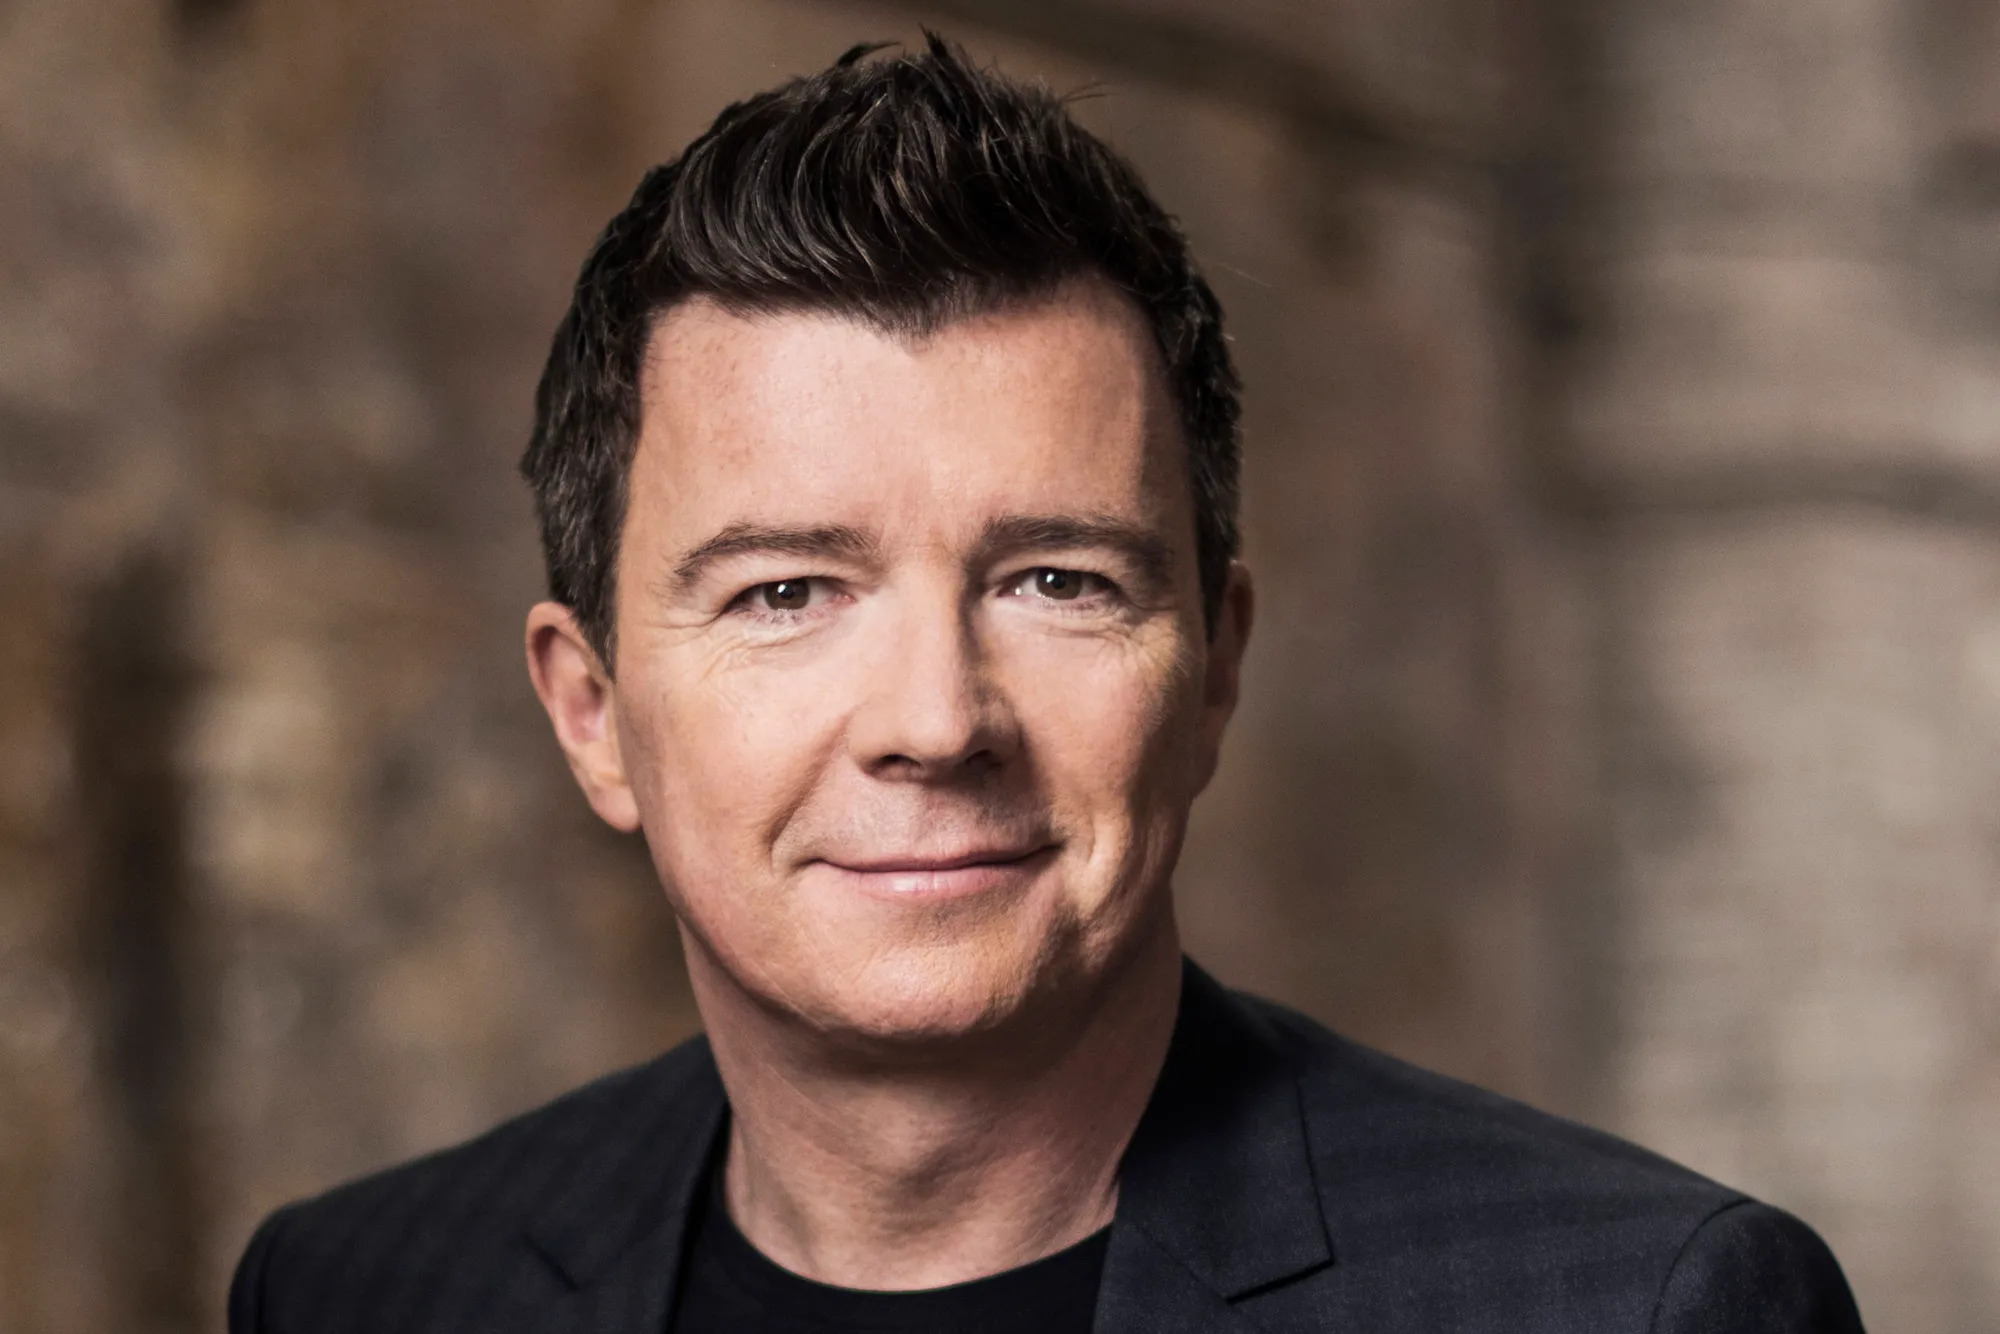 Rick Astley Recreated The Most Iconic Music Video After Years